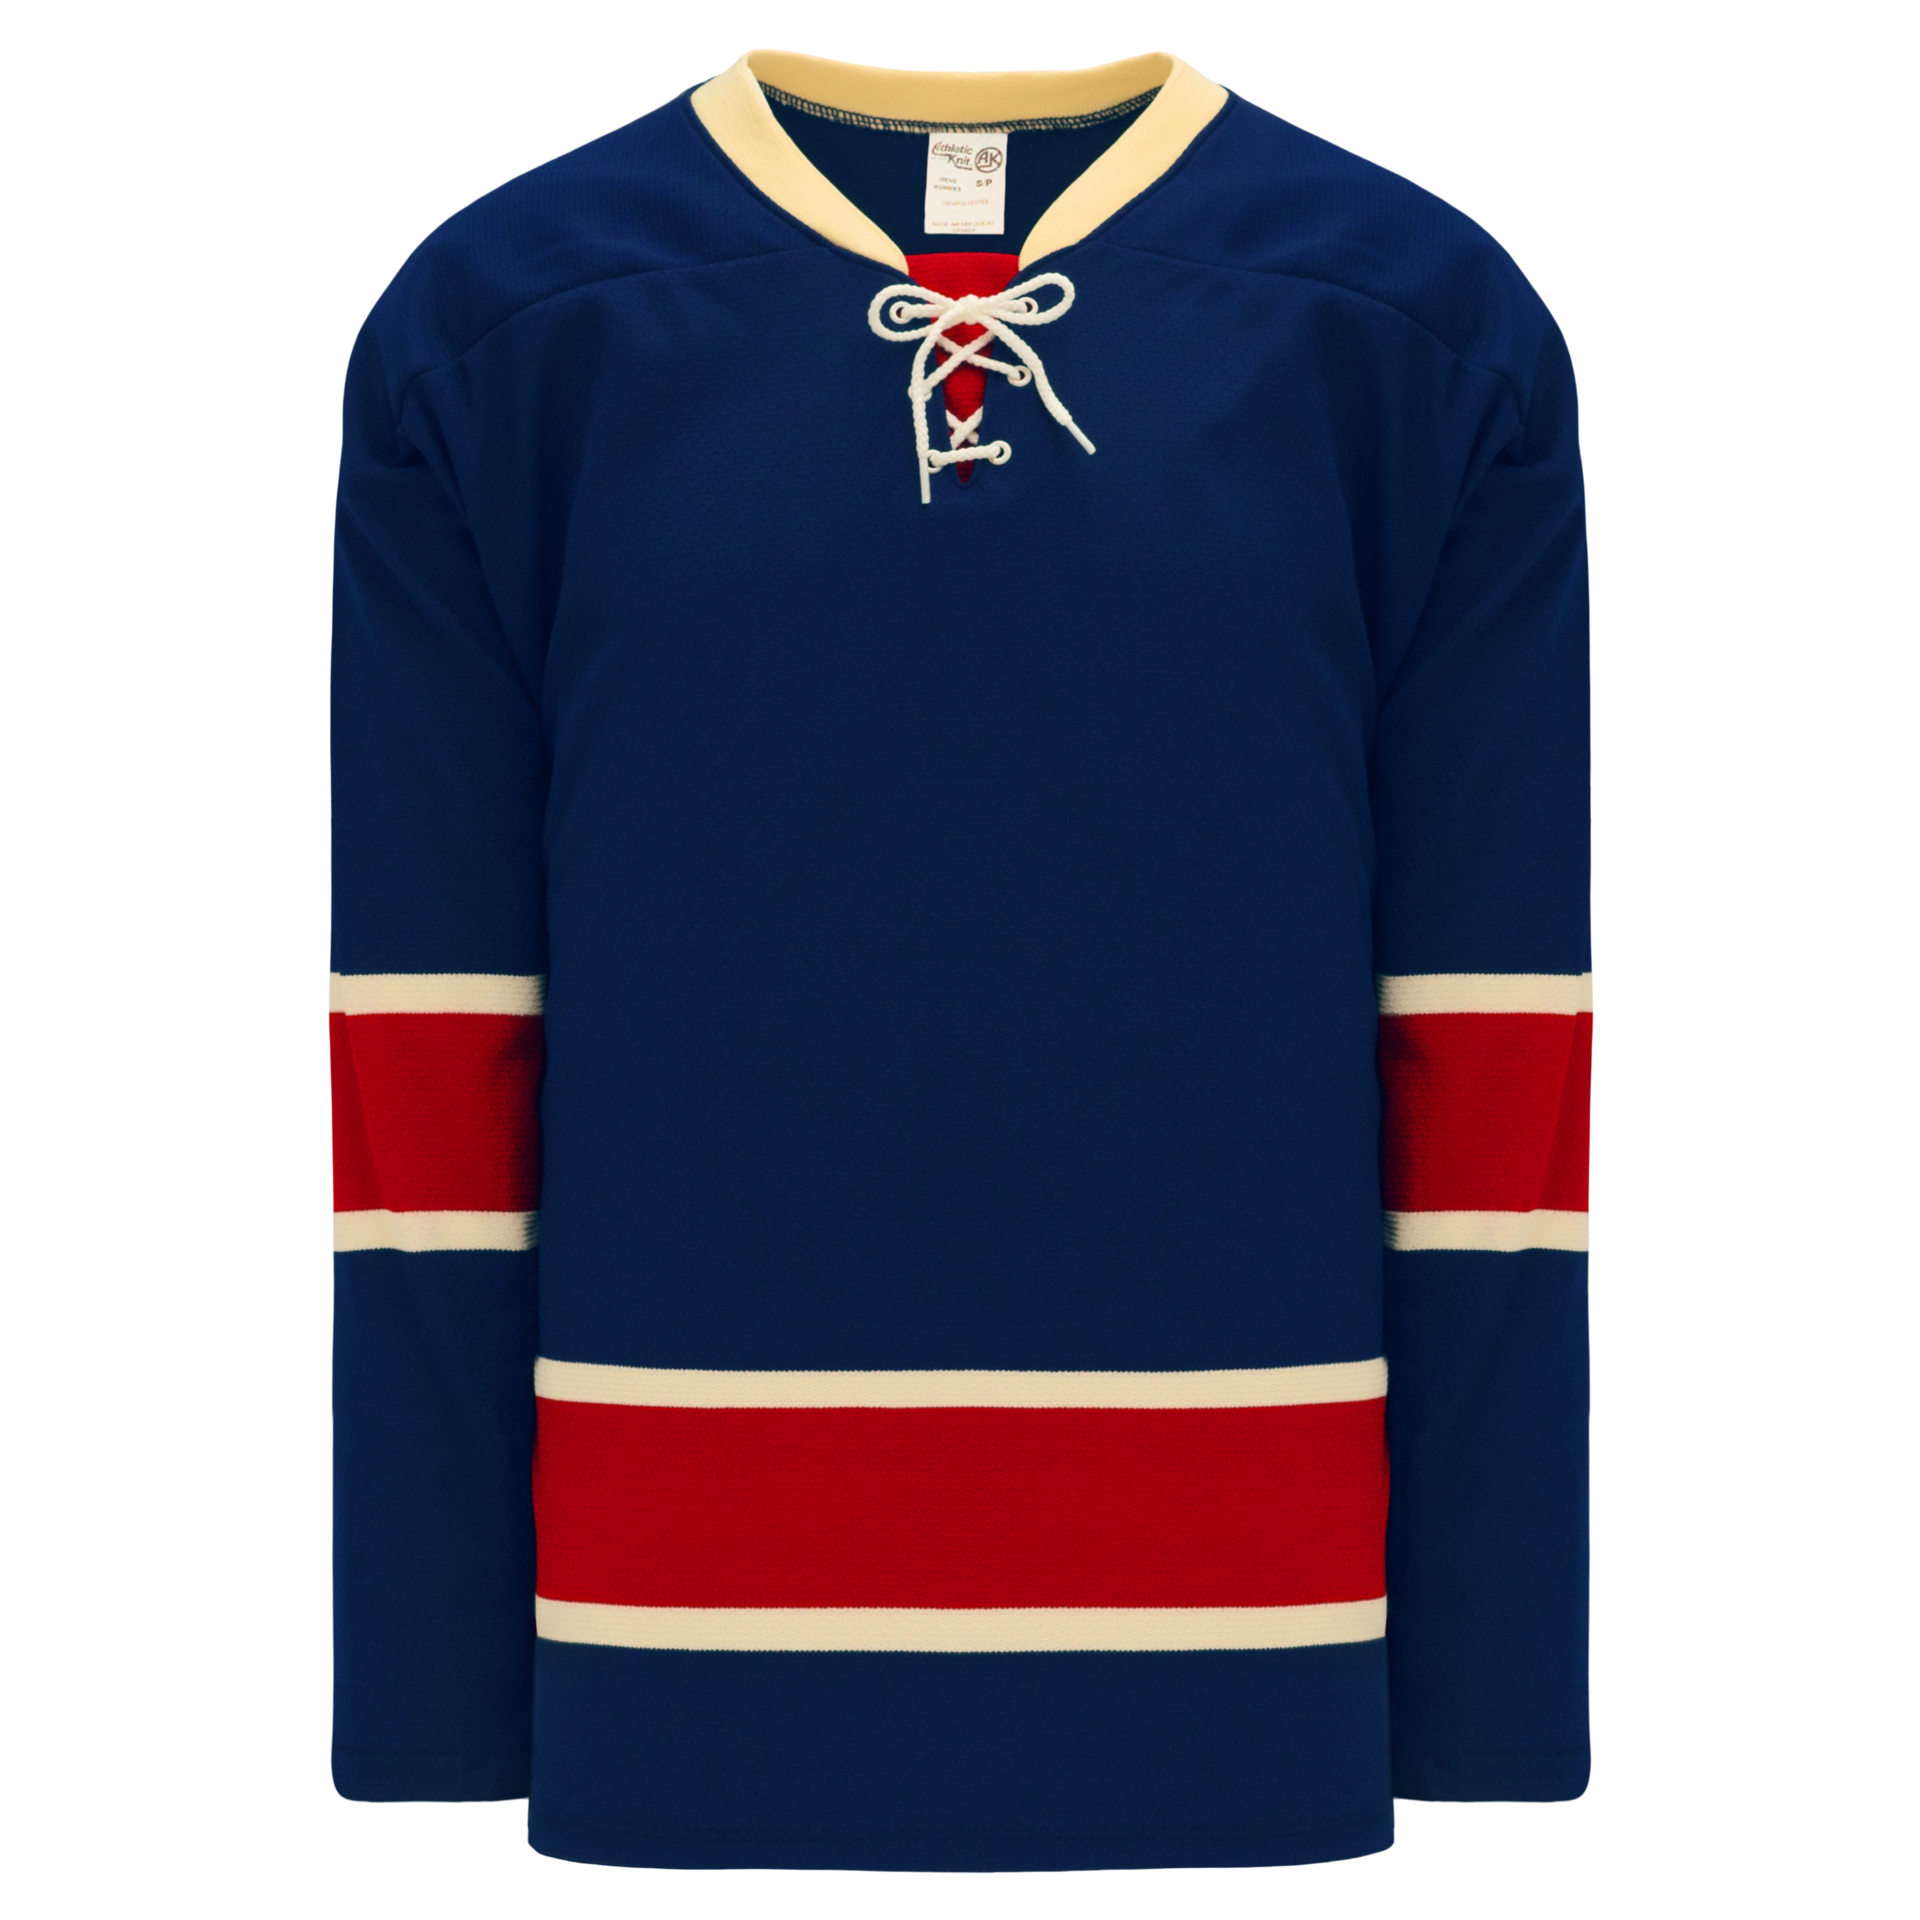 Buffalo Sabres on X: Our heritage white-based uniform with a